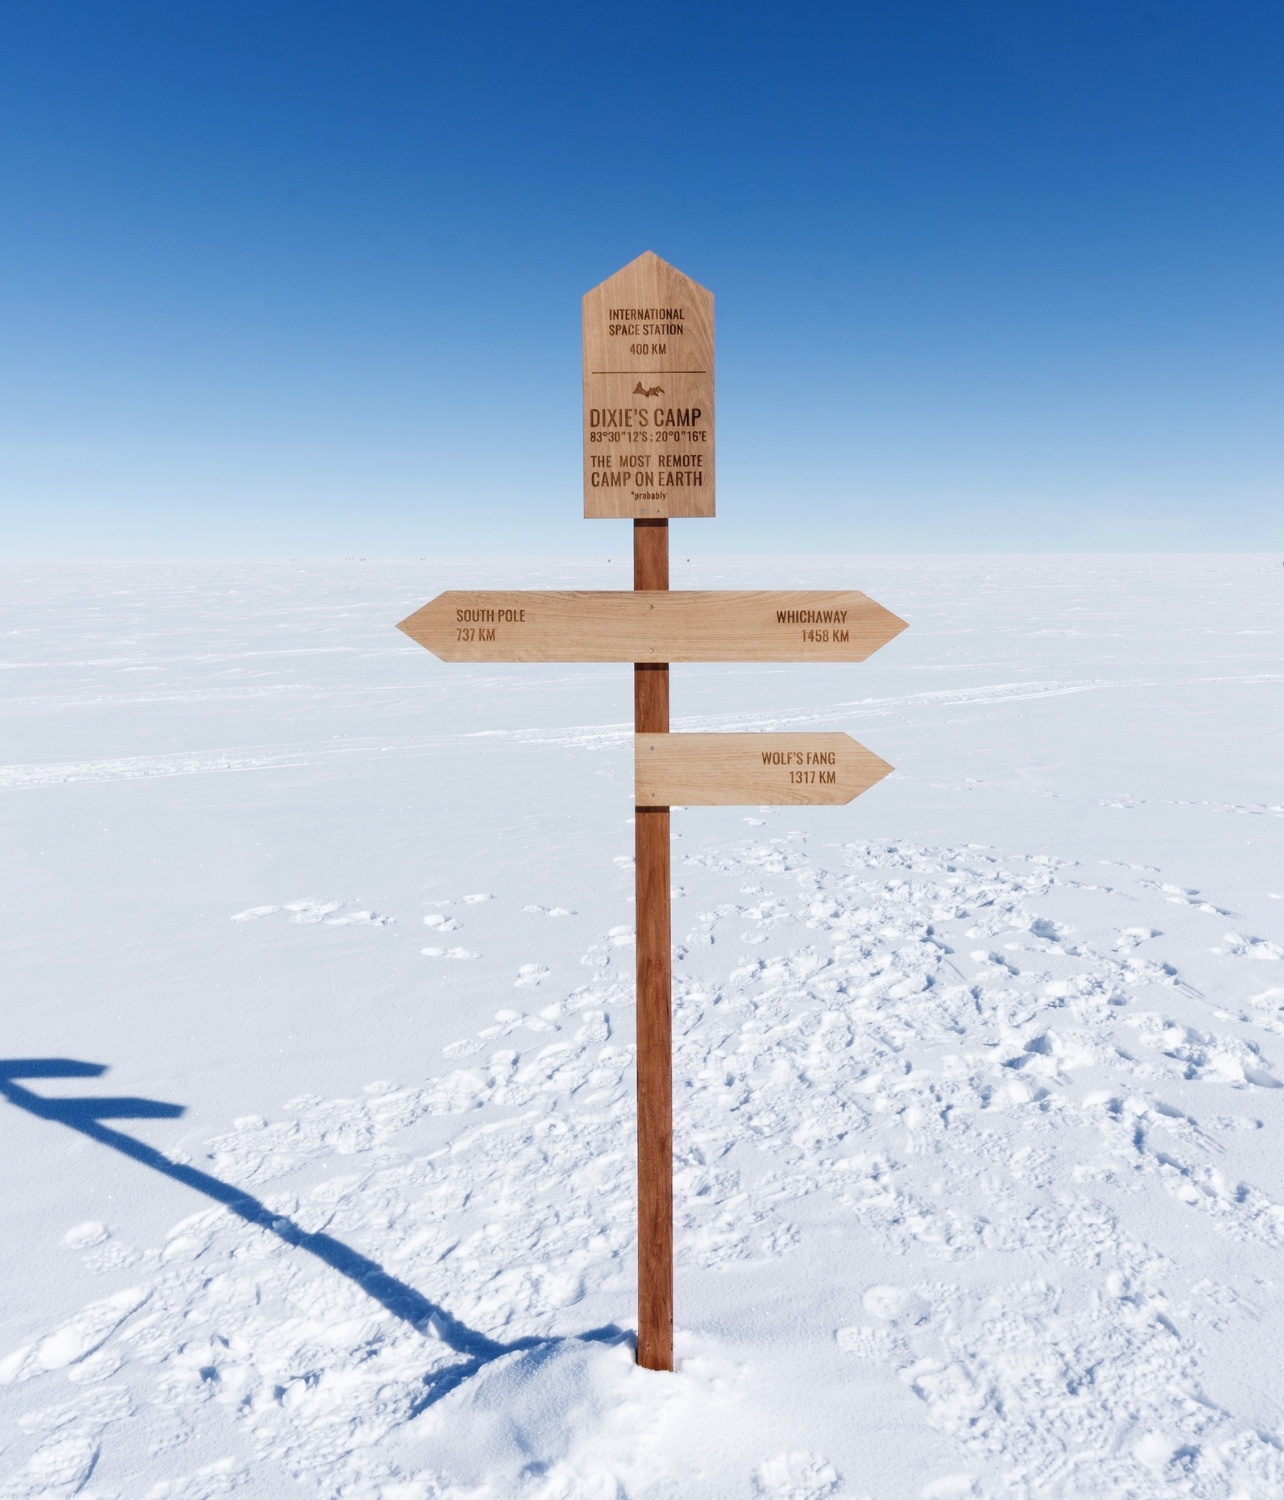 A signpost showing points on the continent